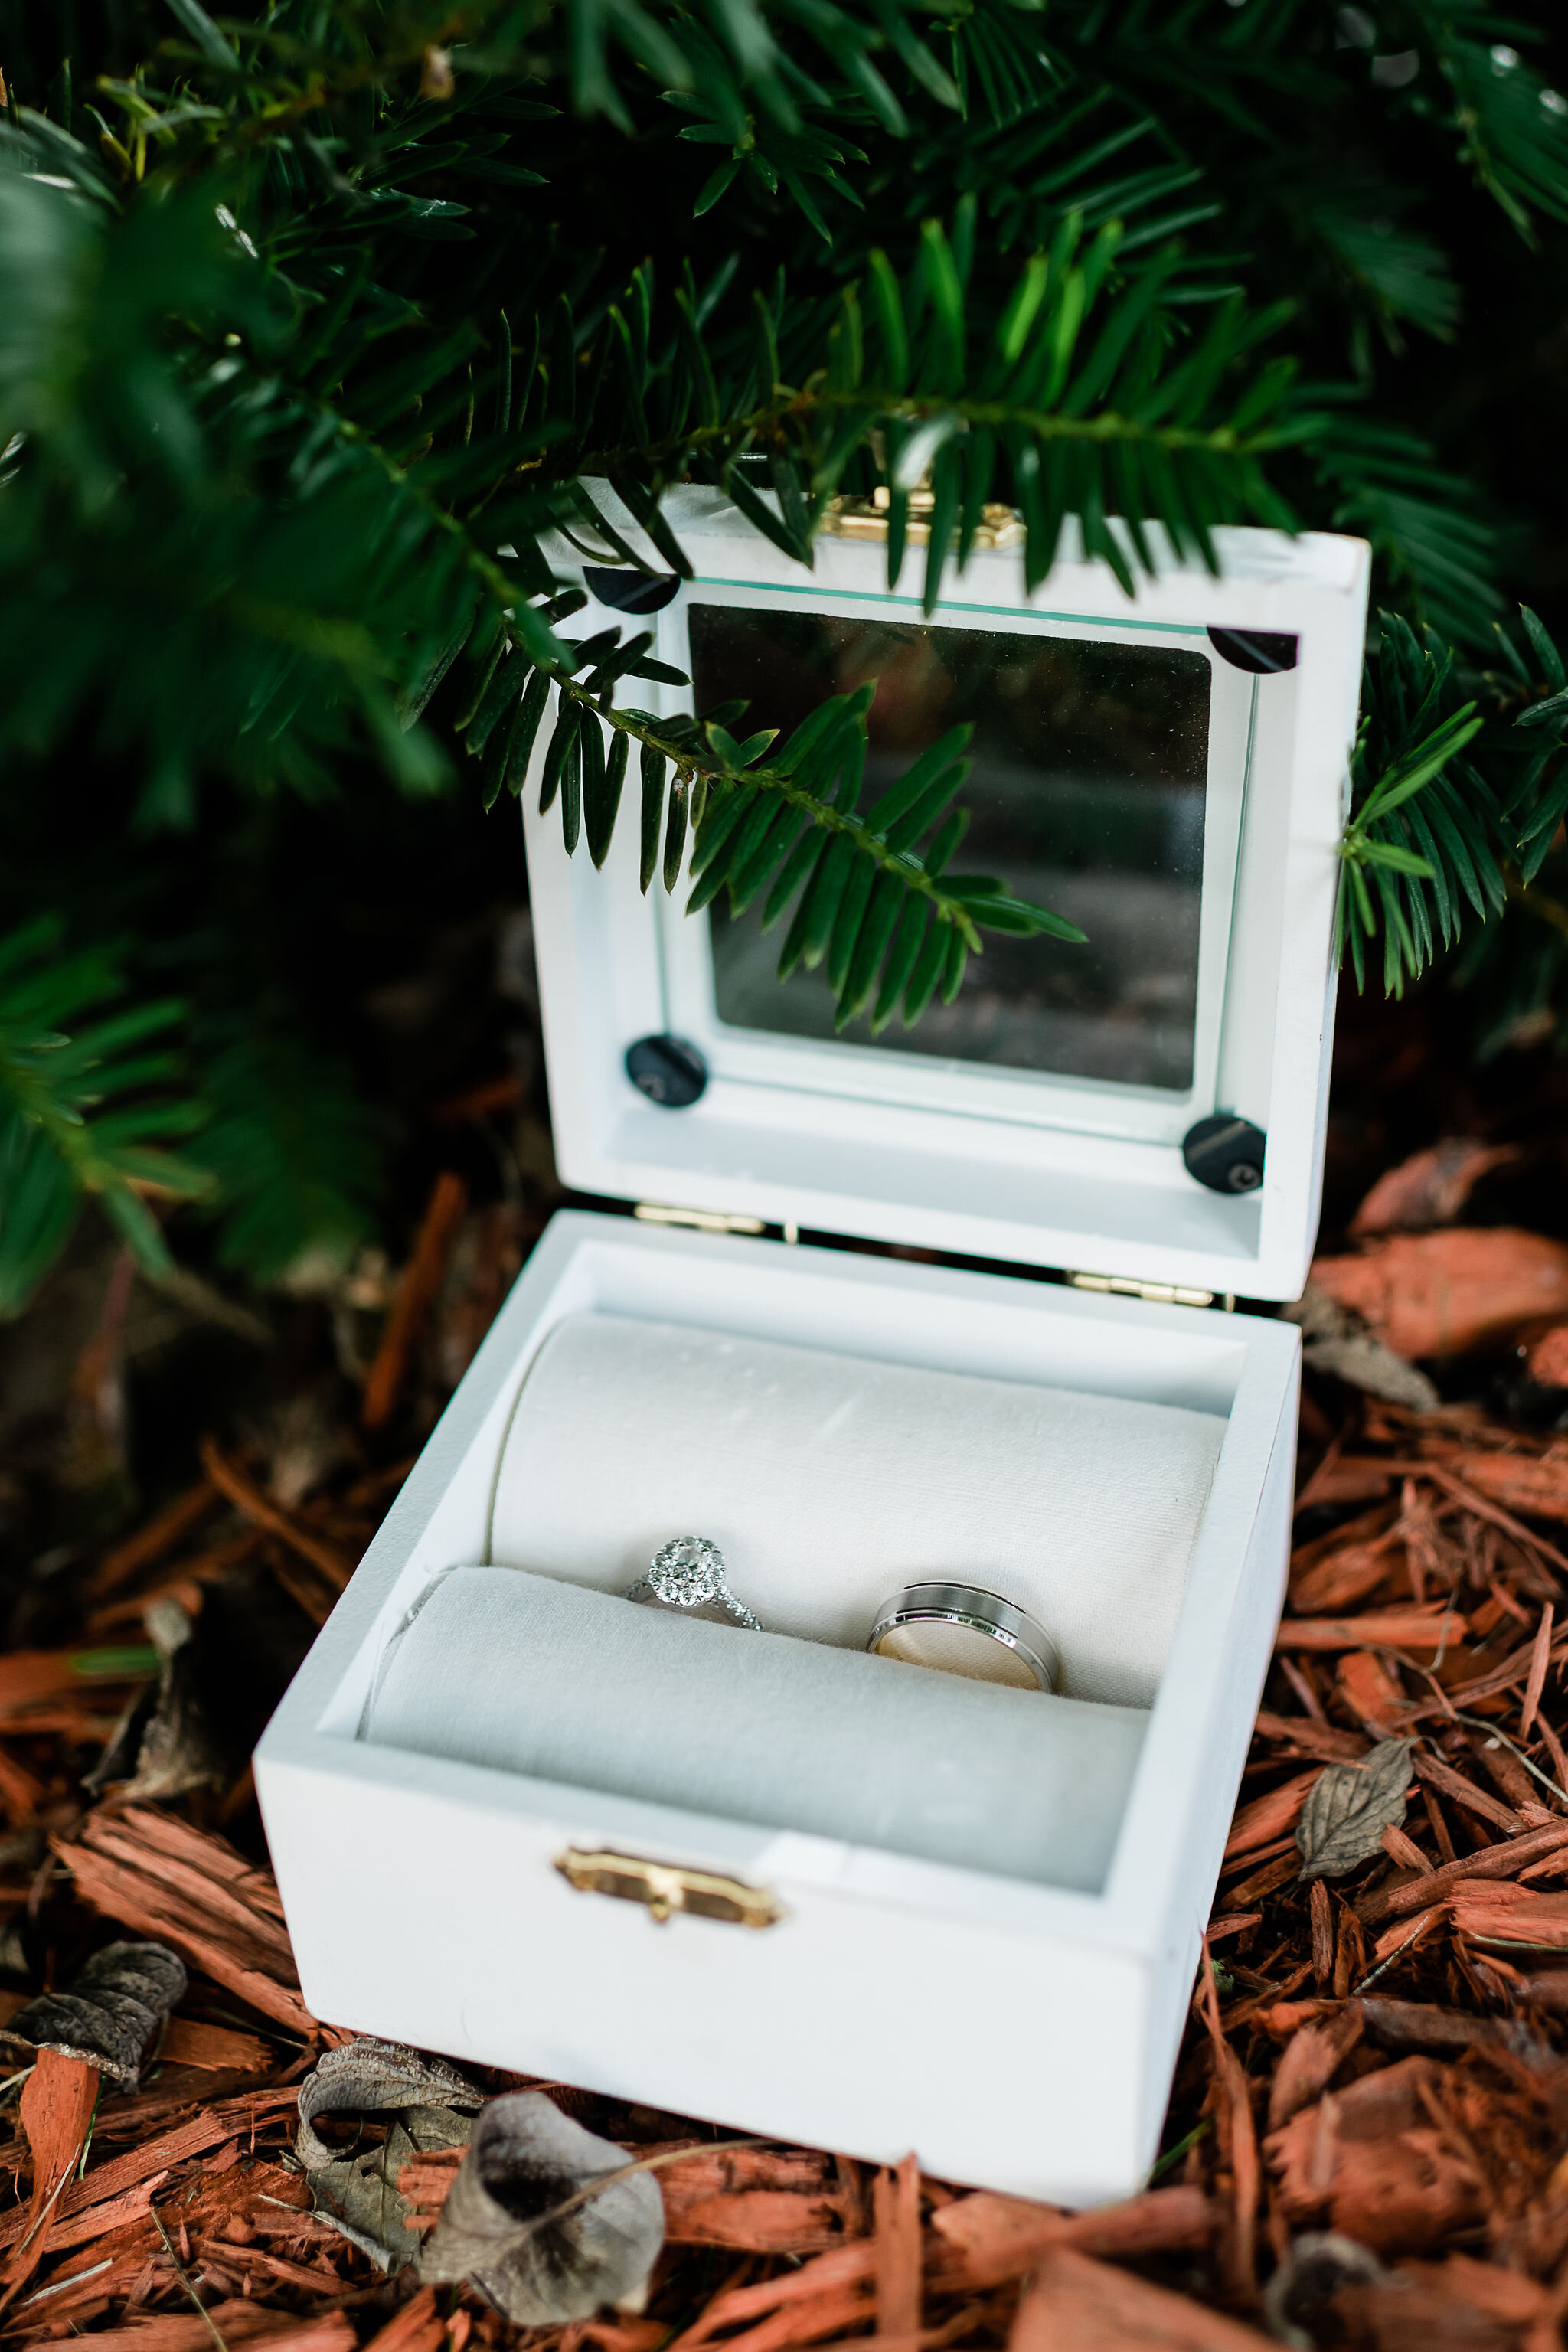 Wedding rings in a white ring box